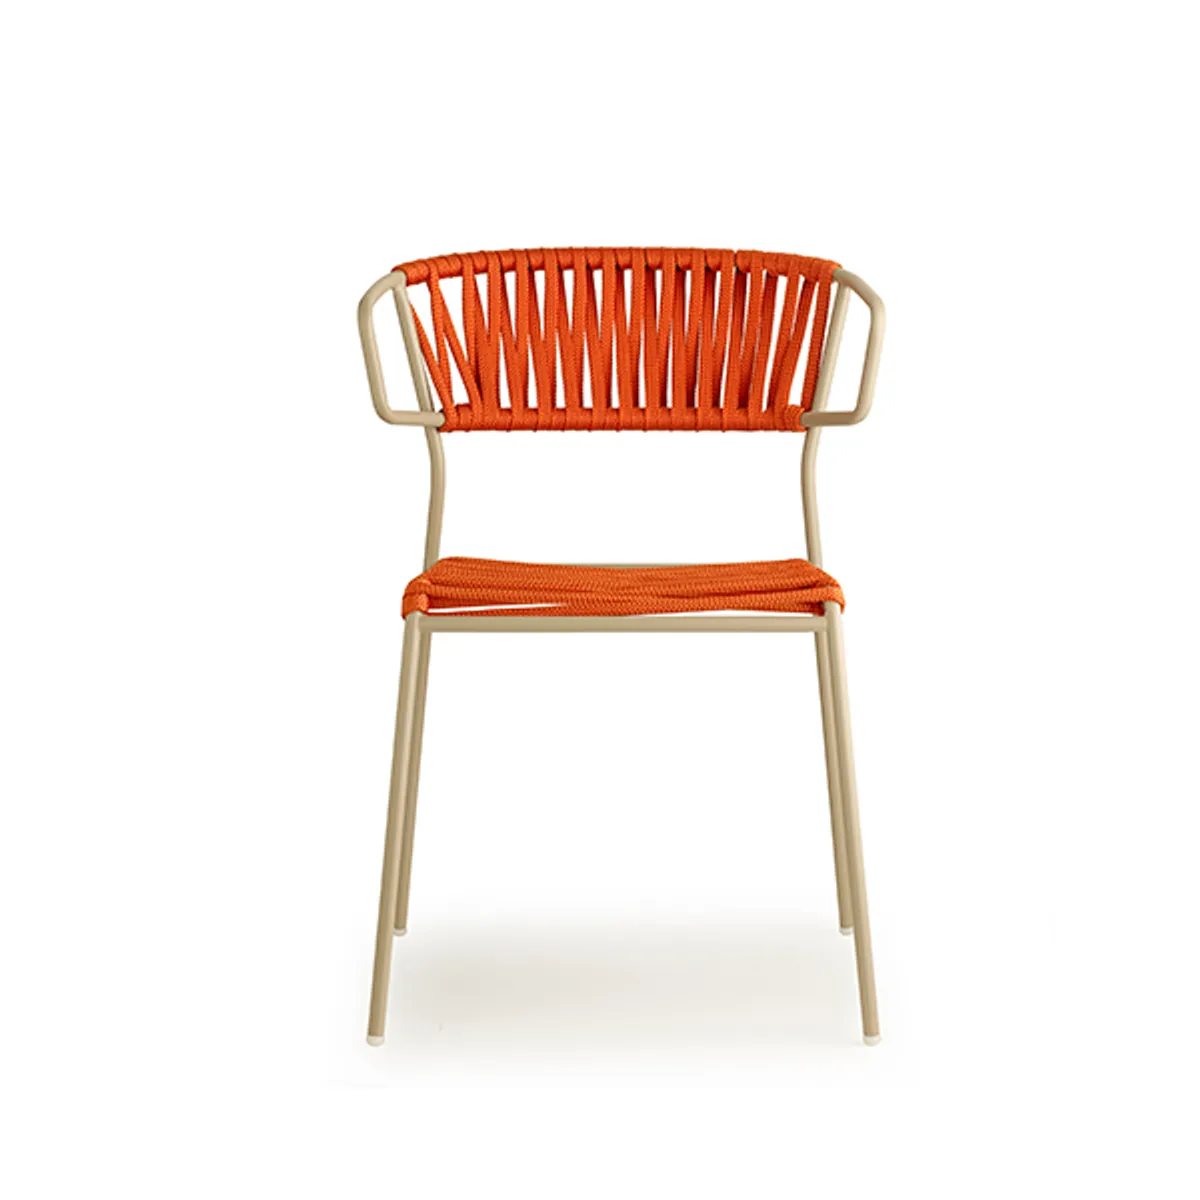 Robyn Weave Chair Outdoor Hospitality Furniture Insideoutcontracts Orange